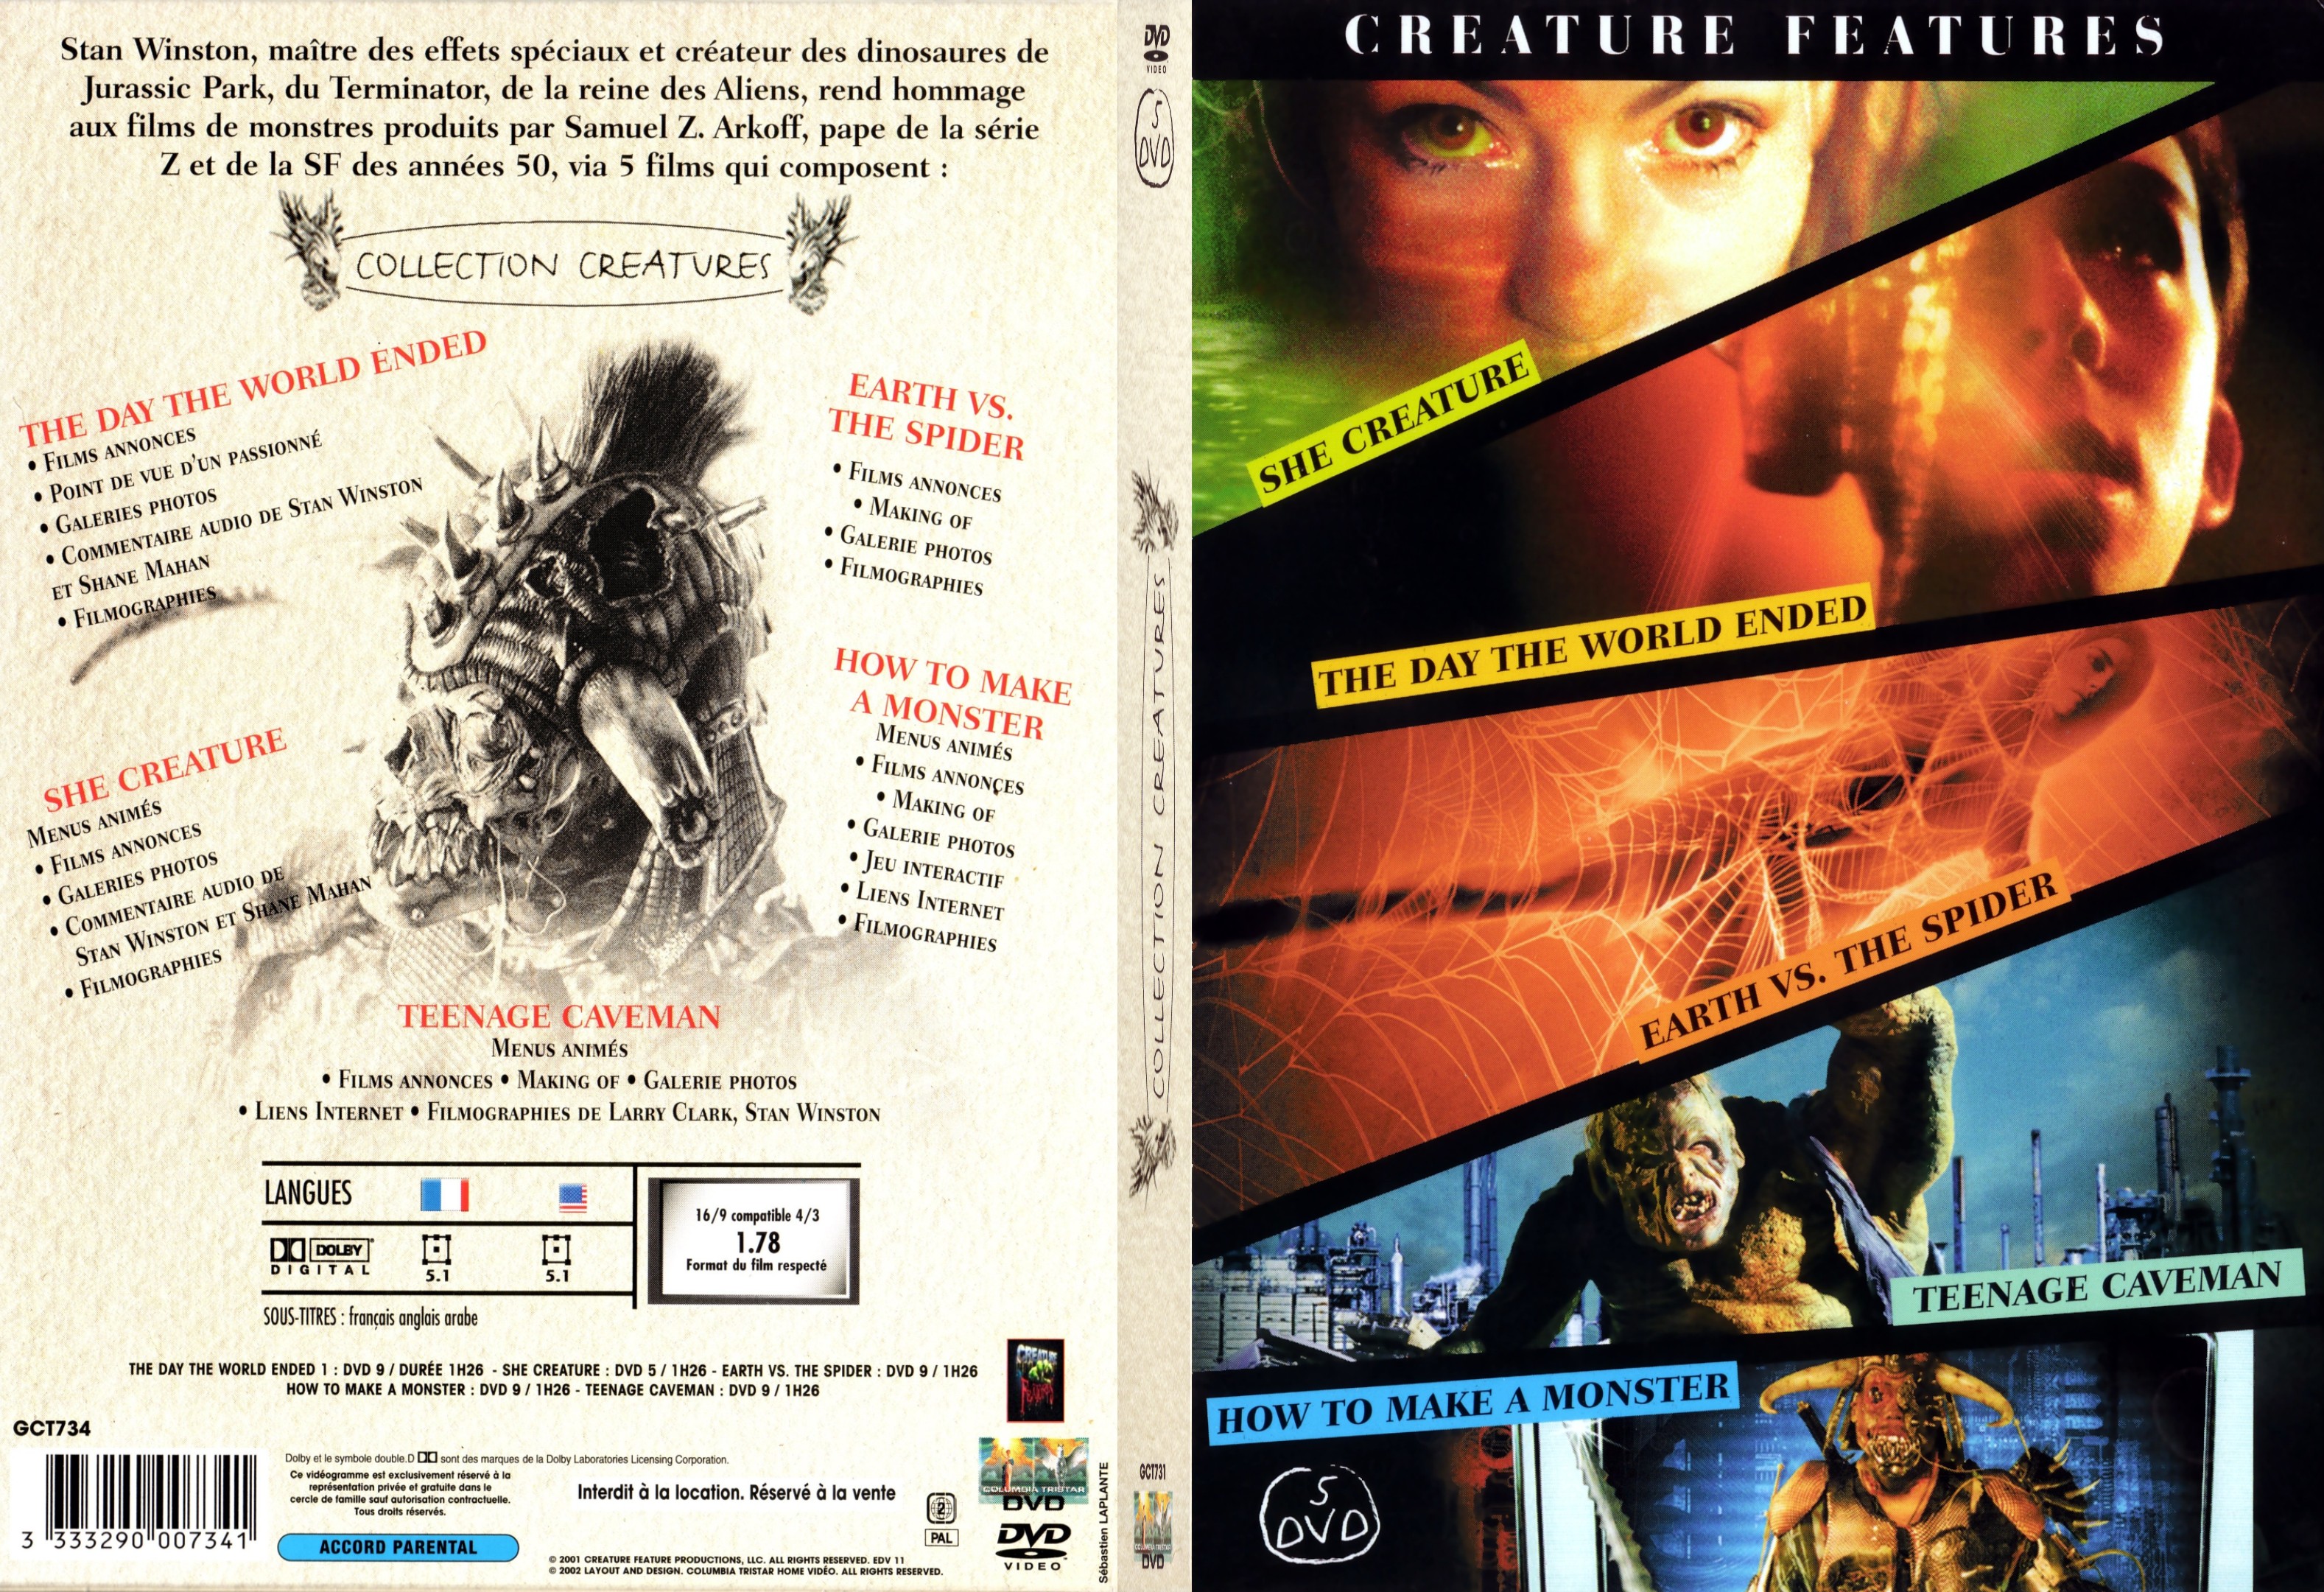 Jaquette DVD She creature + The day the world ended + Earth vs The Spider + Teenage caveman + How to make a monster COFFRET - SLIM